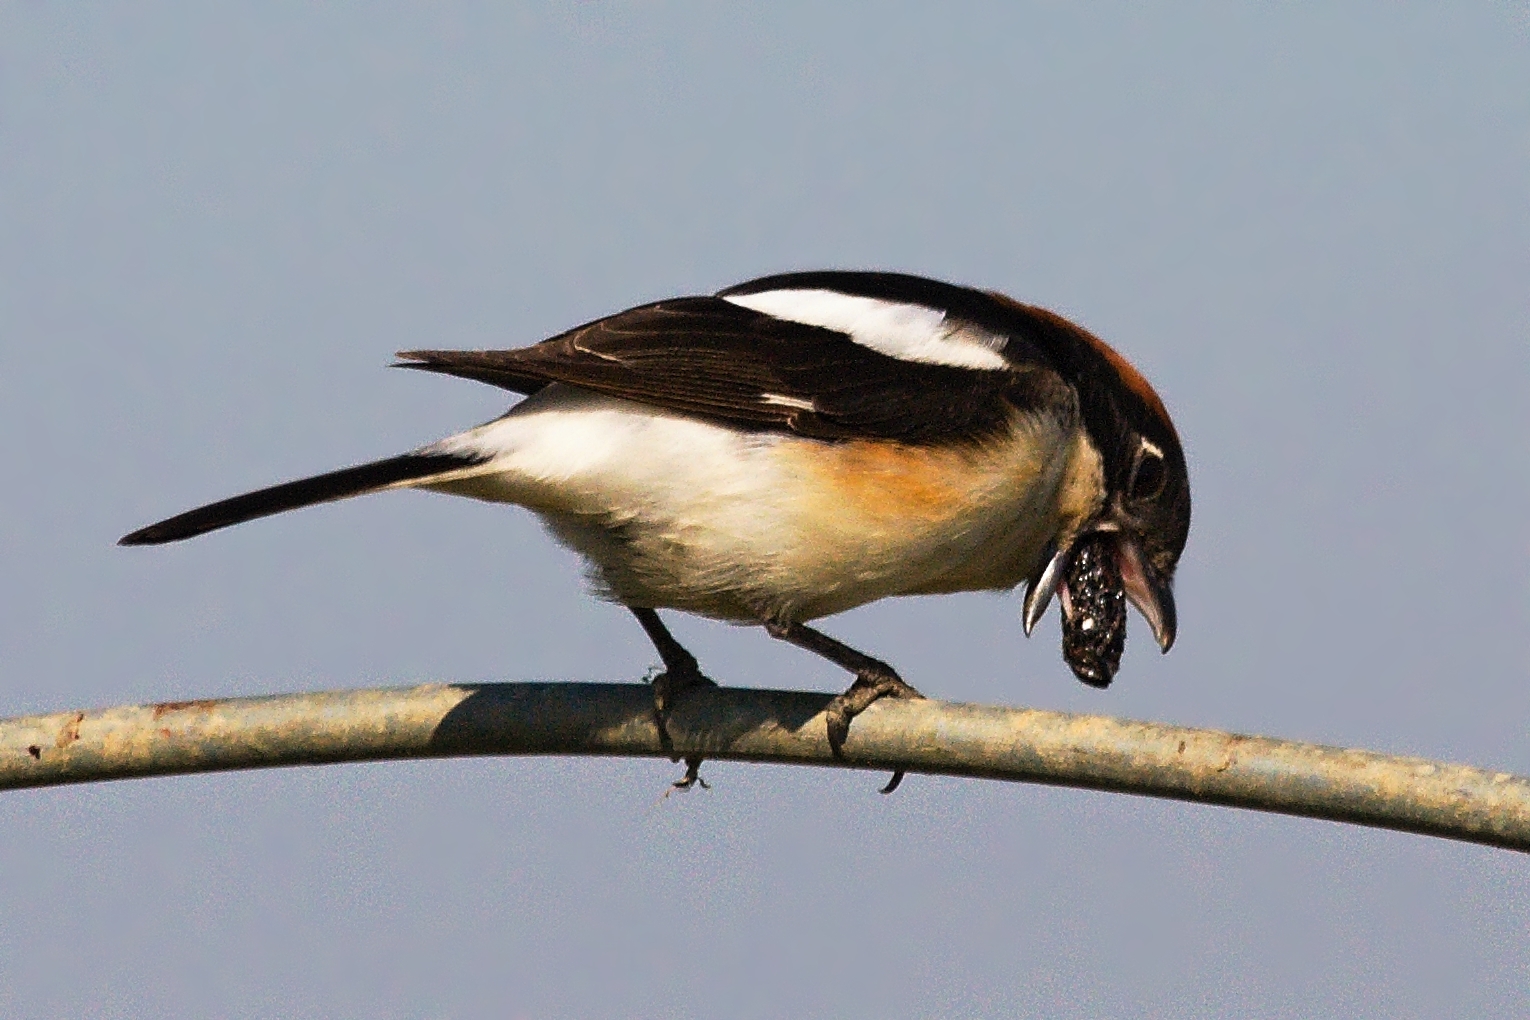 On the occurrence and diet of a migrating Woodchat Shrike (Lanius senator) in Slovakia